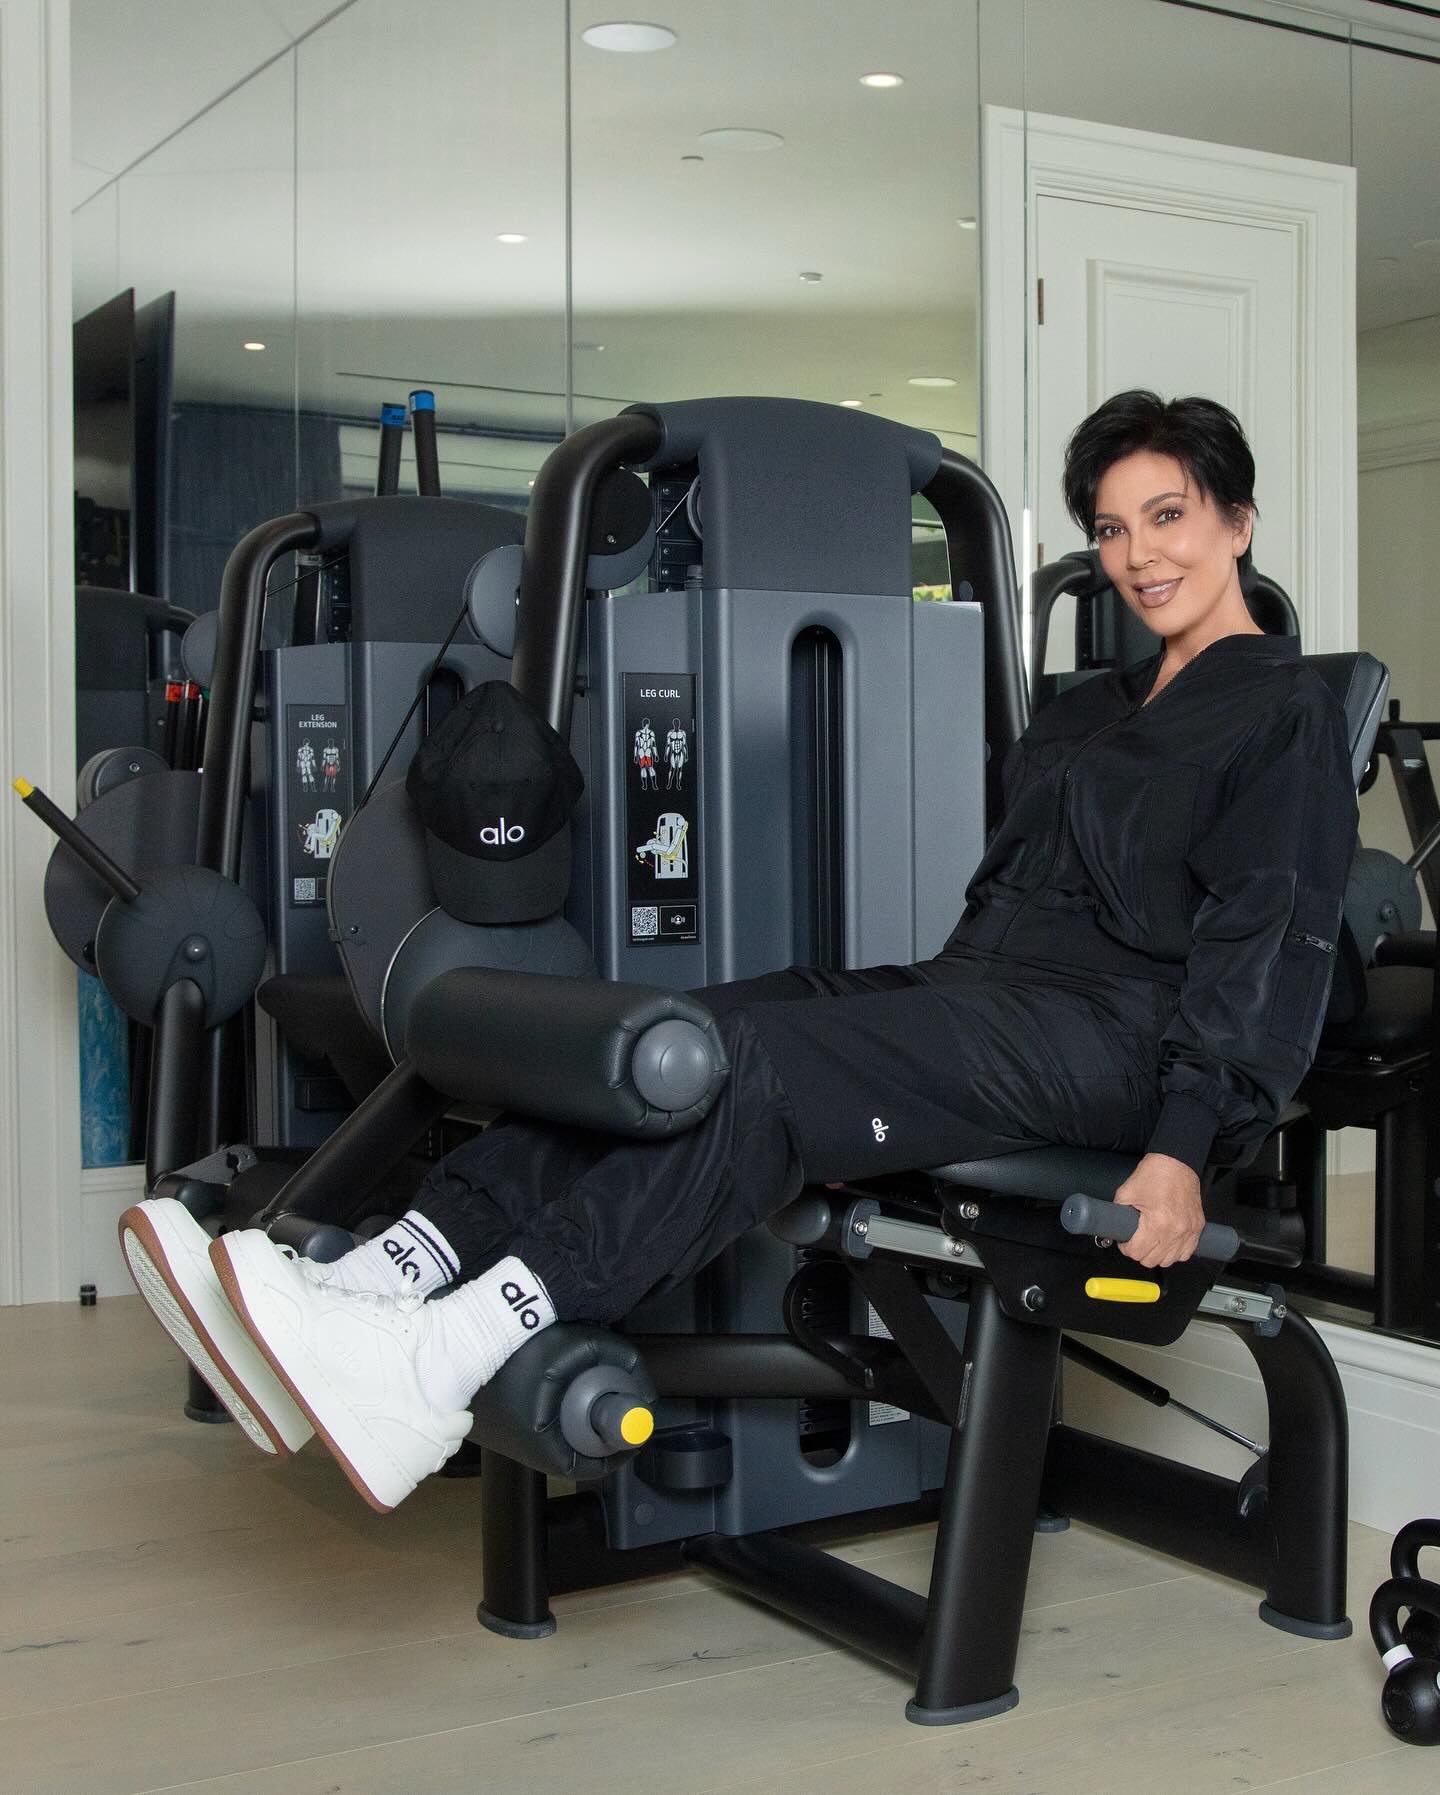 Fans warned Kris of losing too much weight after she posed in Alo activewear